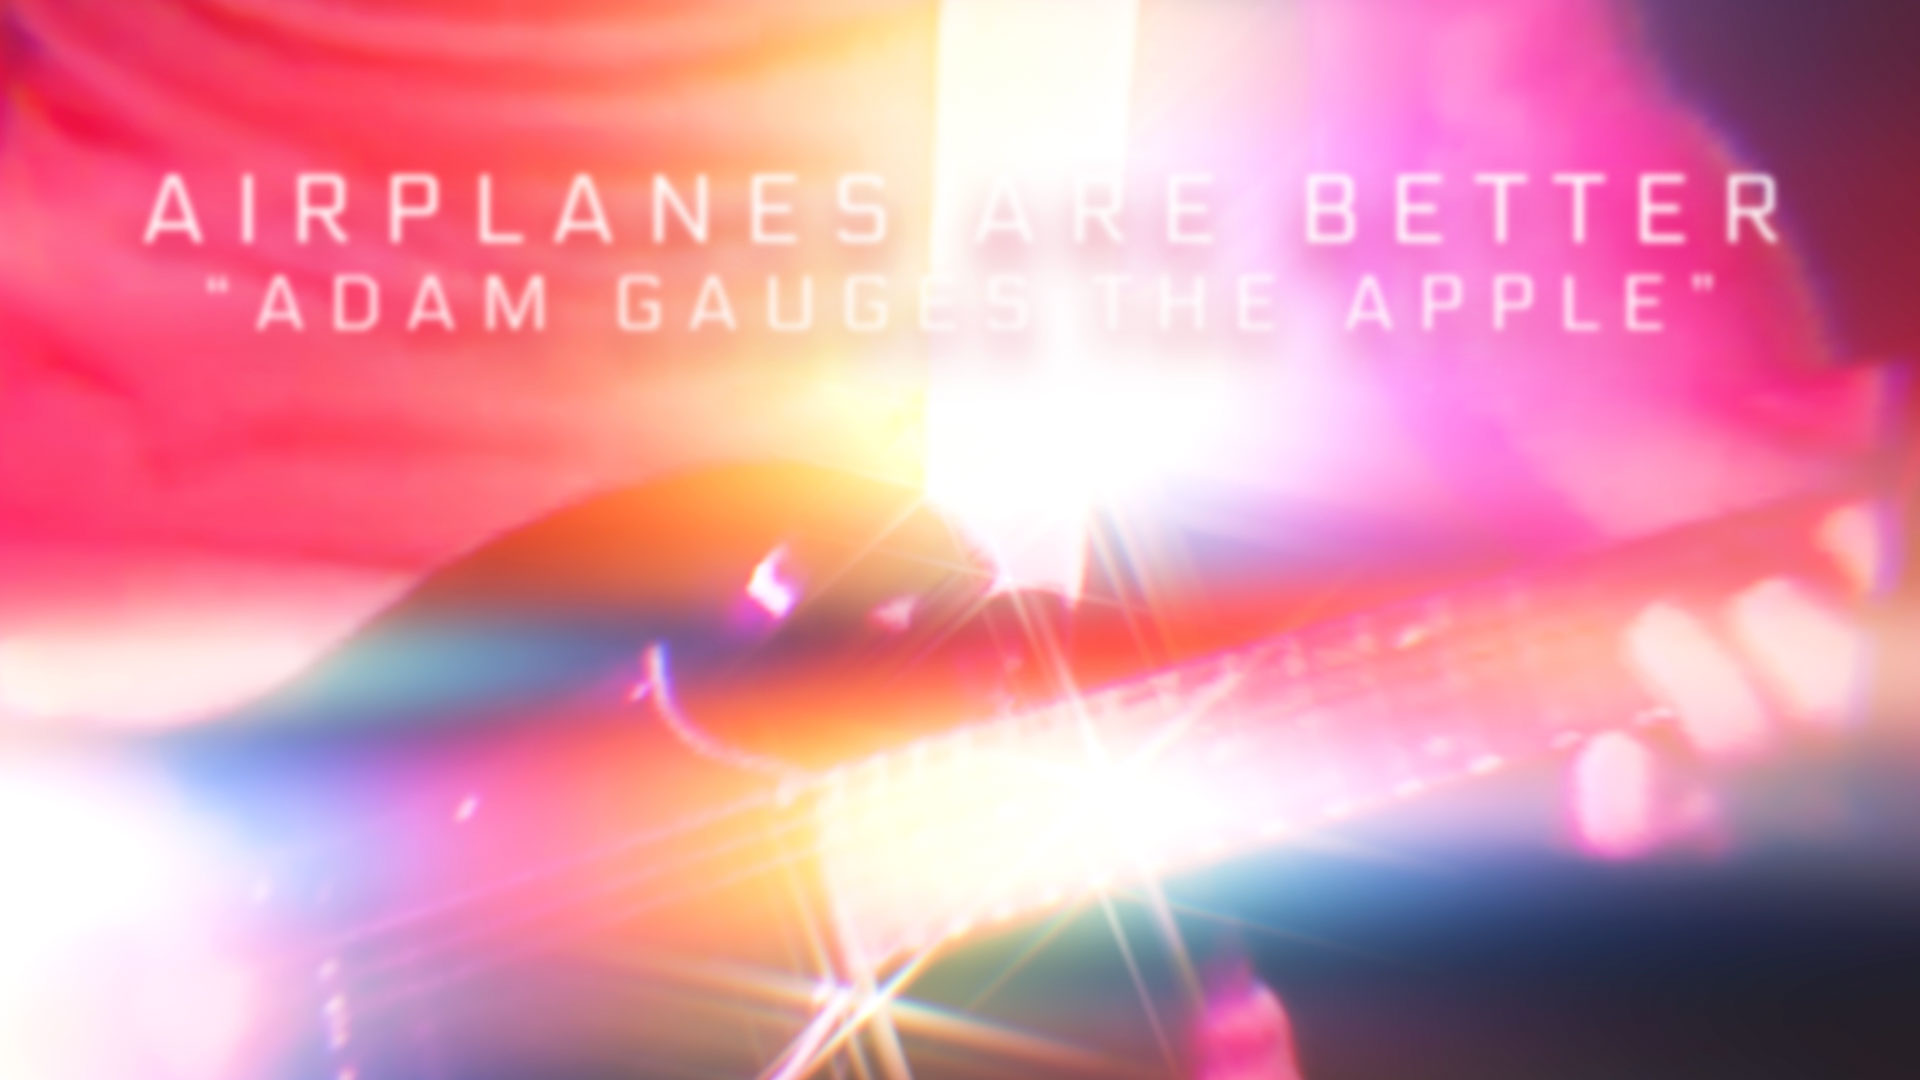 Airplanes Are Better "Adam Gauges The Apple"